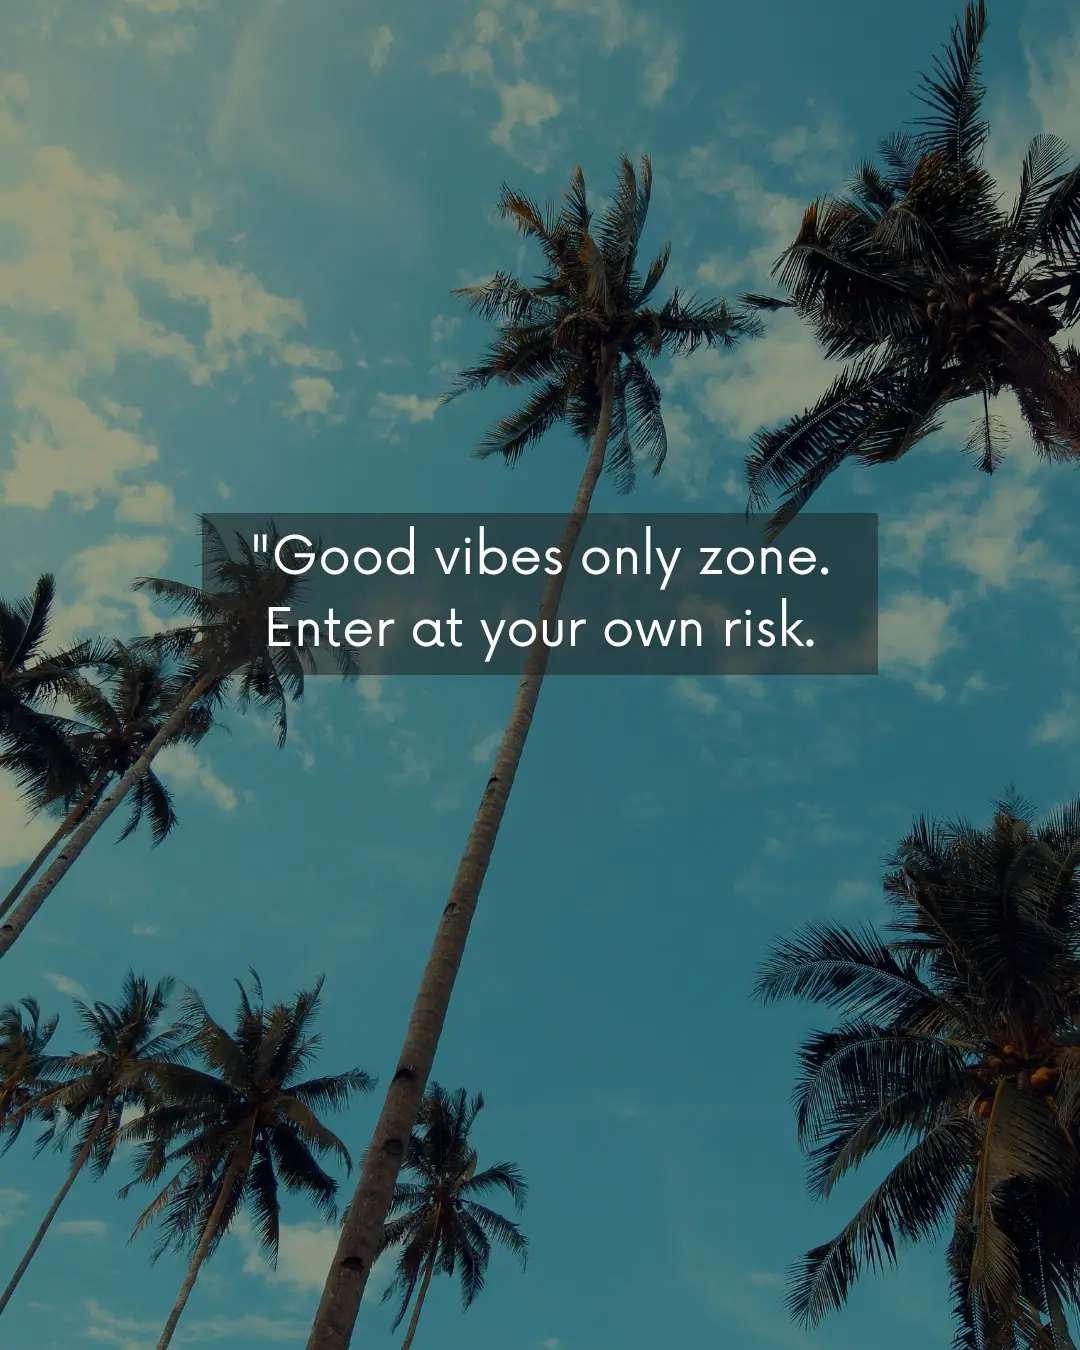 Positive Vibes Quotes for Instagram